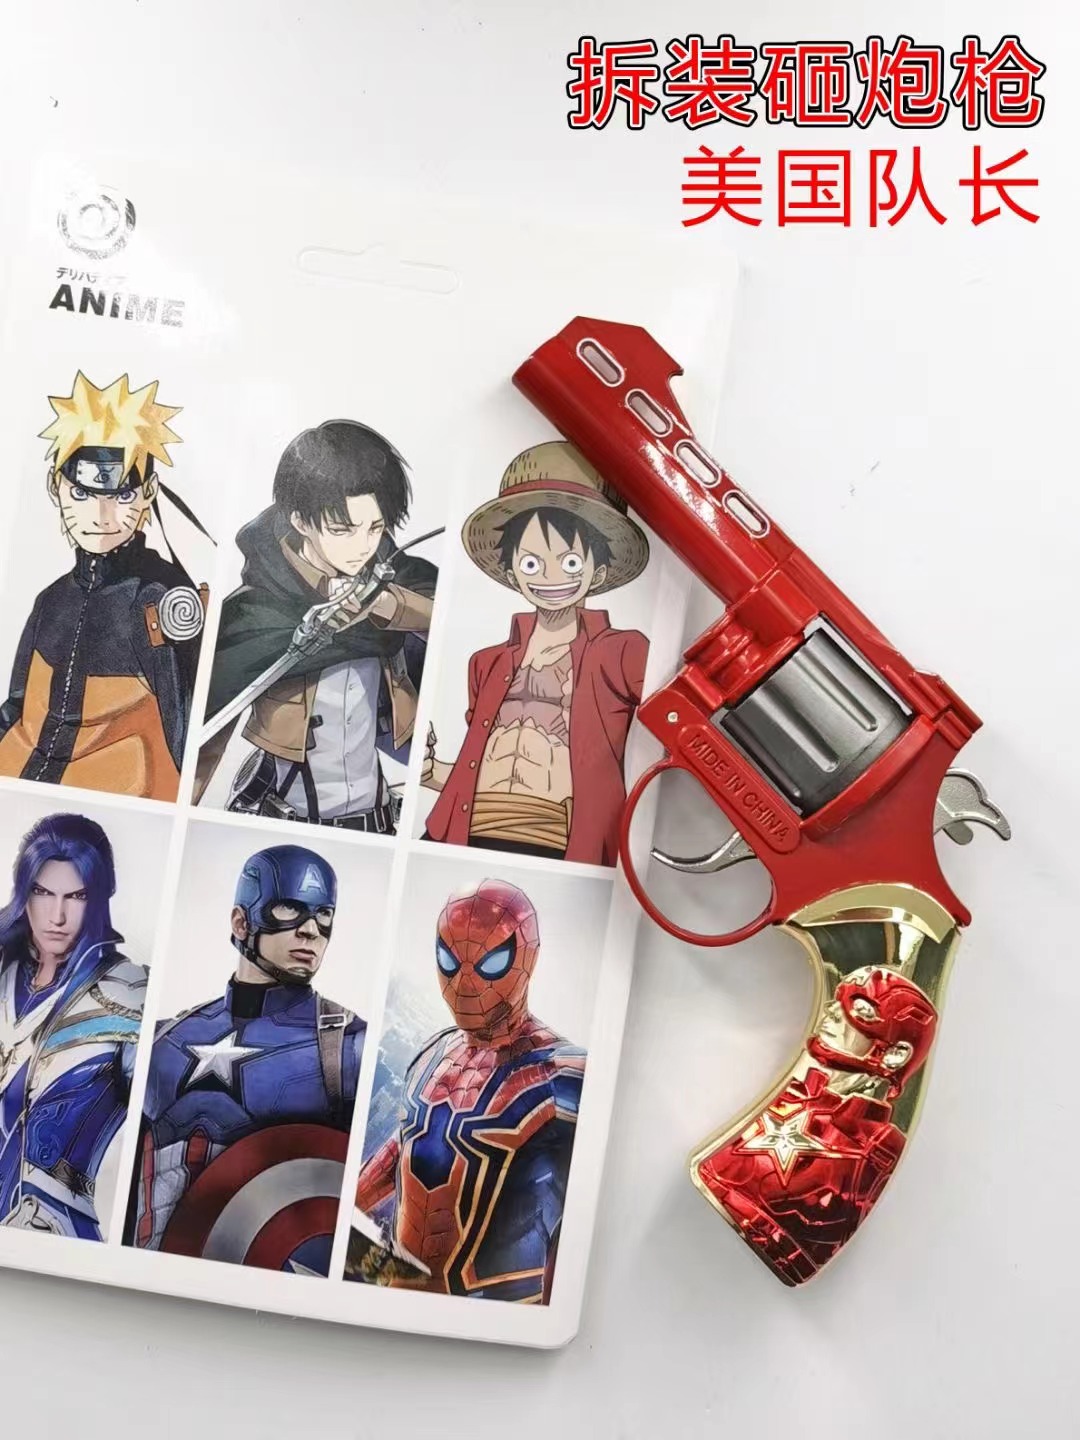 Avengers anime disassembly and assembly of cannon smashing gun toys